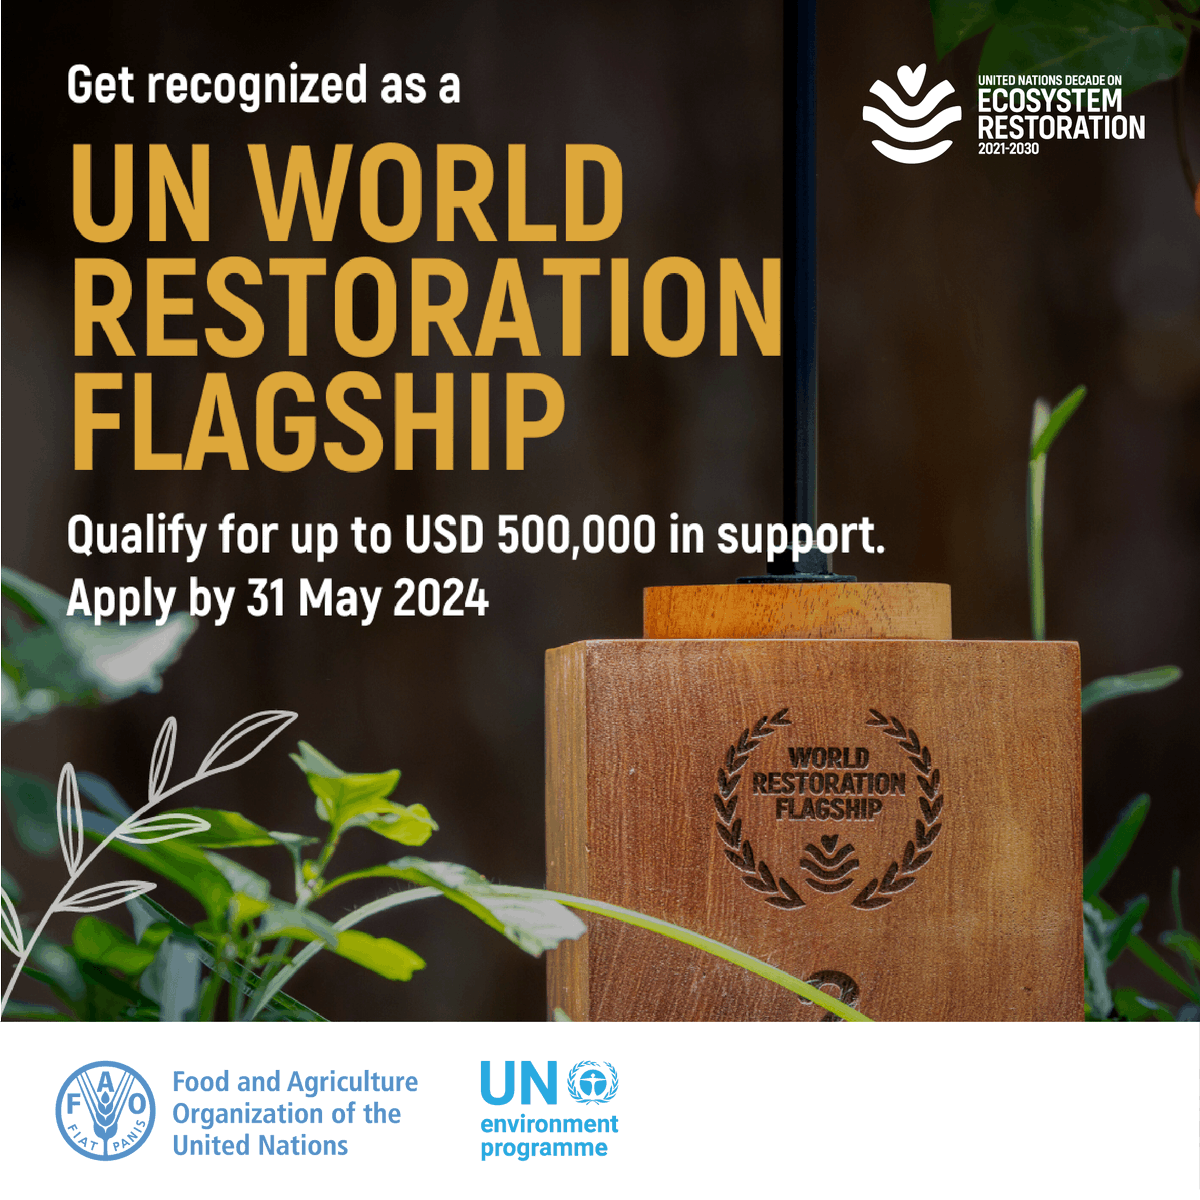 Are you from a country or region whose efforts in restoring an ecosystem could inspire others around the world? Get recognized as a World Restoration Flagship under the UN Decade on Ecosystem Restoration! Apply by 31 May 👉bit.ly/442x3ZL #GenerationRestoration